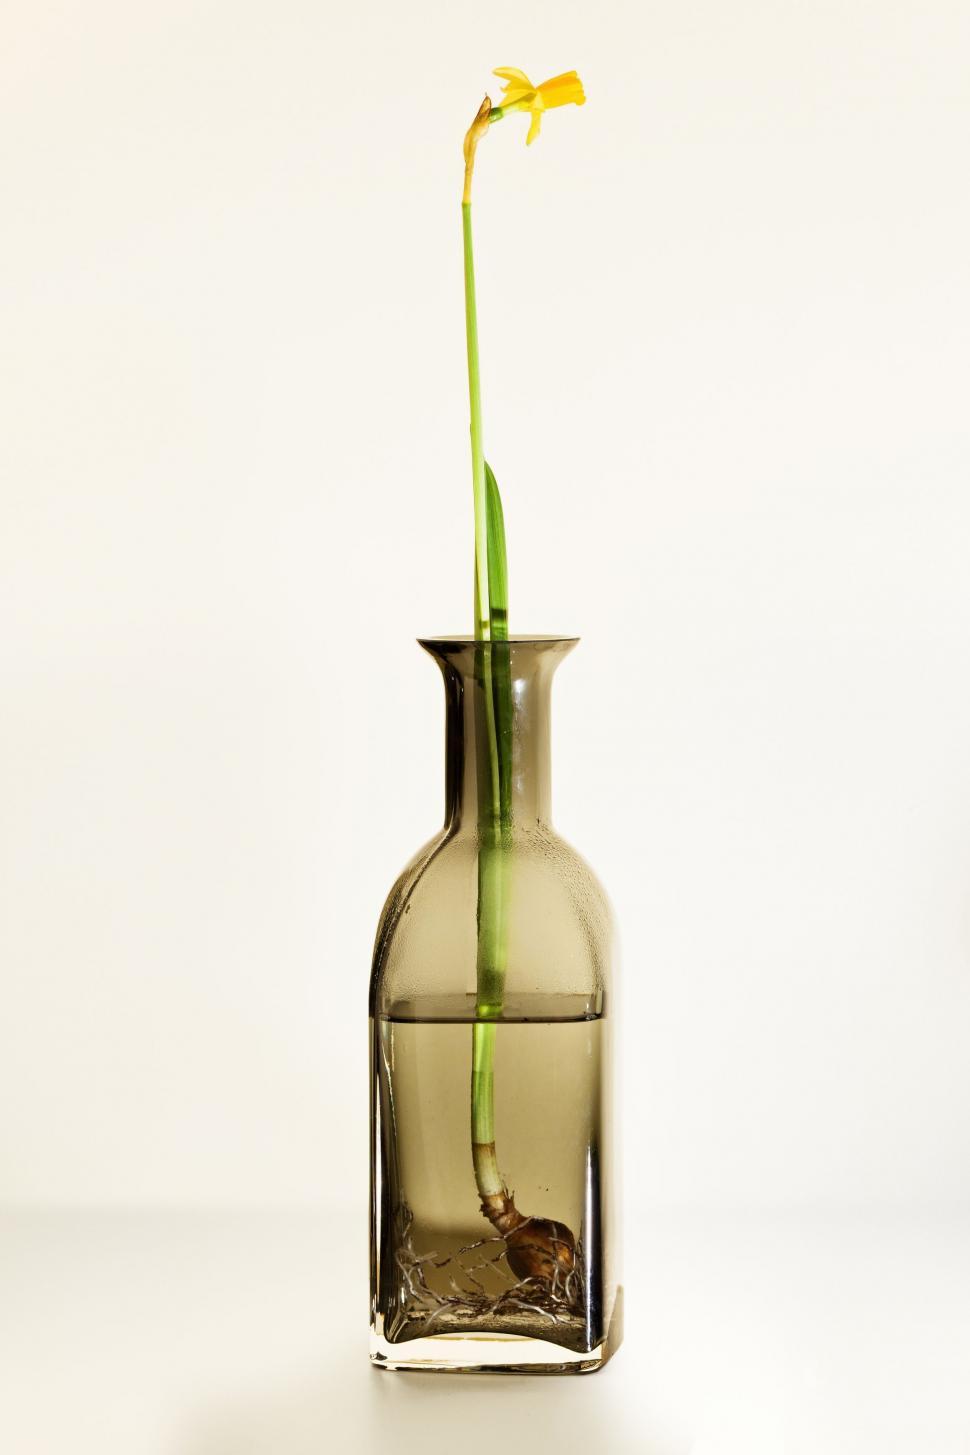 Free Image of Roots of Narcissus Flower in Bottle  